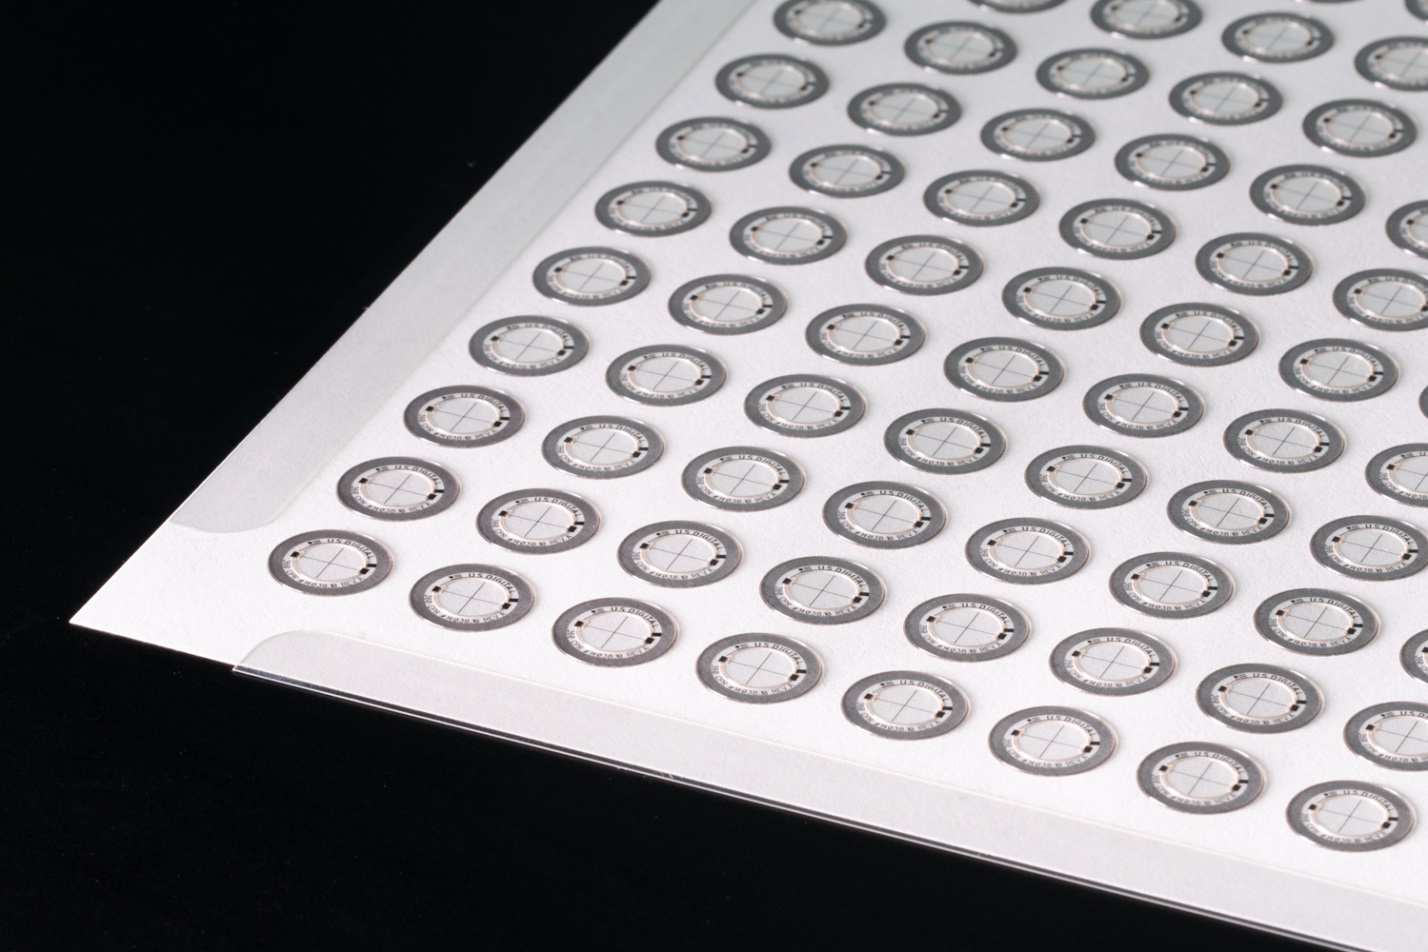 A vacuum channel in the work table lies under the edges of the sheet of disks. A Mylar 'picture frame' positioned above the vacuum channel creates a seal that holds the sheet in place.